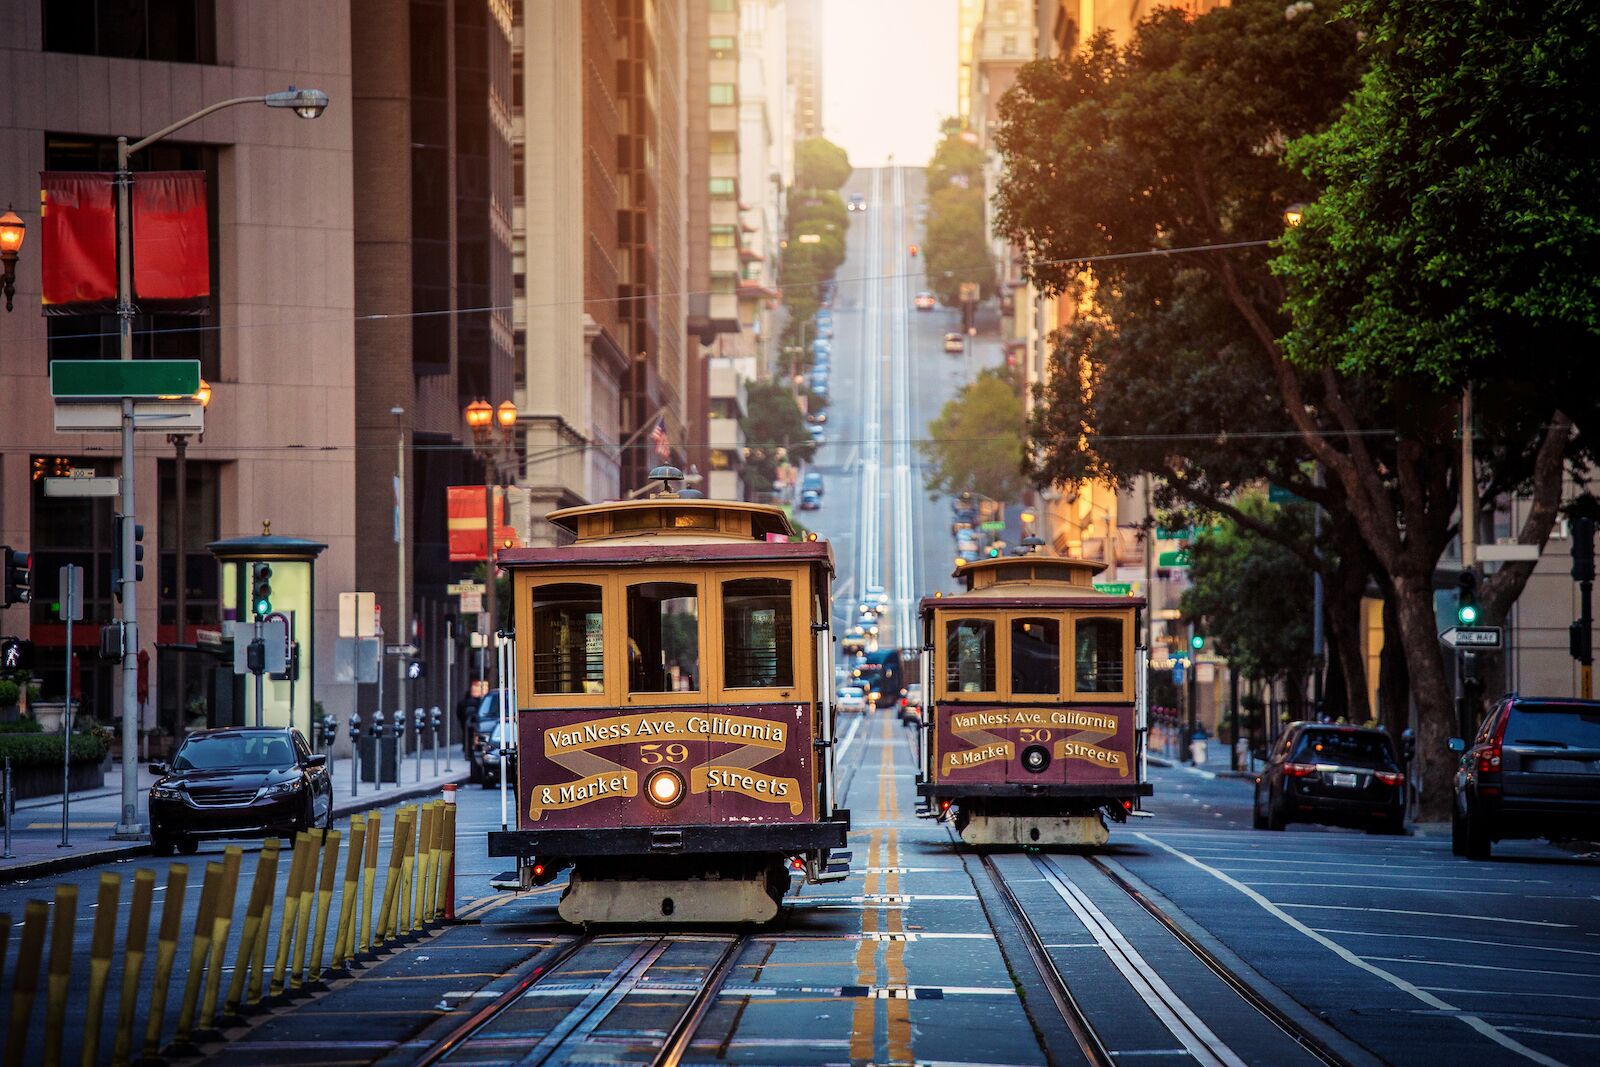 Historic trams rolling along the streets of San Francisco